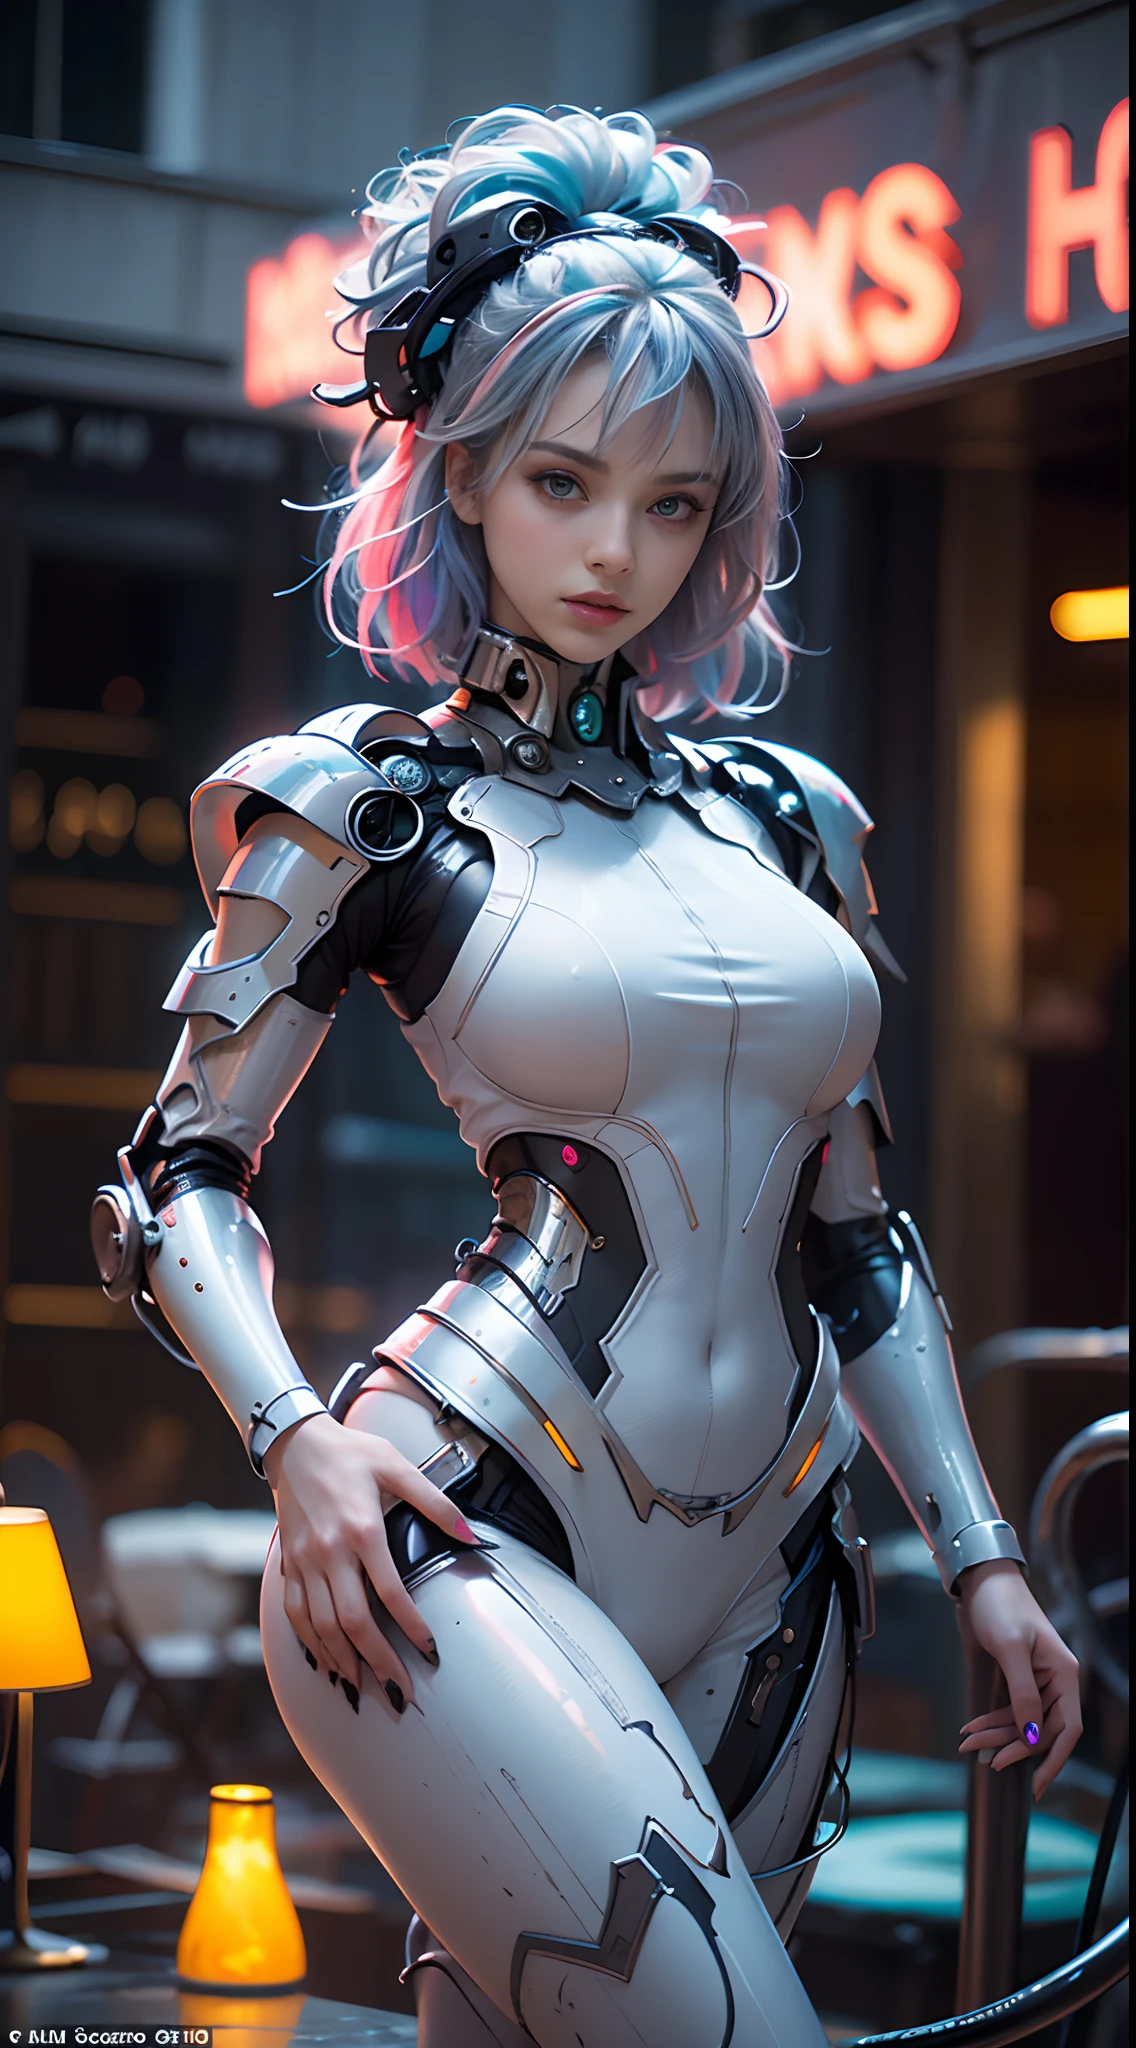 unreal engine:1.4,UHD,La Best Quality:1.4, photorealistic:1.4, skin texture:1.4, Masterpiece:1.8,first work, Best Quality, 1girl, Ives Girl, mecha, beautiful  lighting, (neon light: 1.2), (evening: 1.5), "first work, Best Quality, 1chica, Full length portrait, pose sensual, ojos bluees, multicolored hair+the payment:1.3+rosado:1.3+blue:1.3, Sculpted legs and tempting curves, full breasts, Beautiful face, many drops of water, clouds, twilights, Open floor plan, watercolor, neon light:1.2, evening:1.5, mecha, beautiful  lighting, Bright neon light: 1.2, unforgettable mysterious night: 1.5",,beautiful fine hands